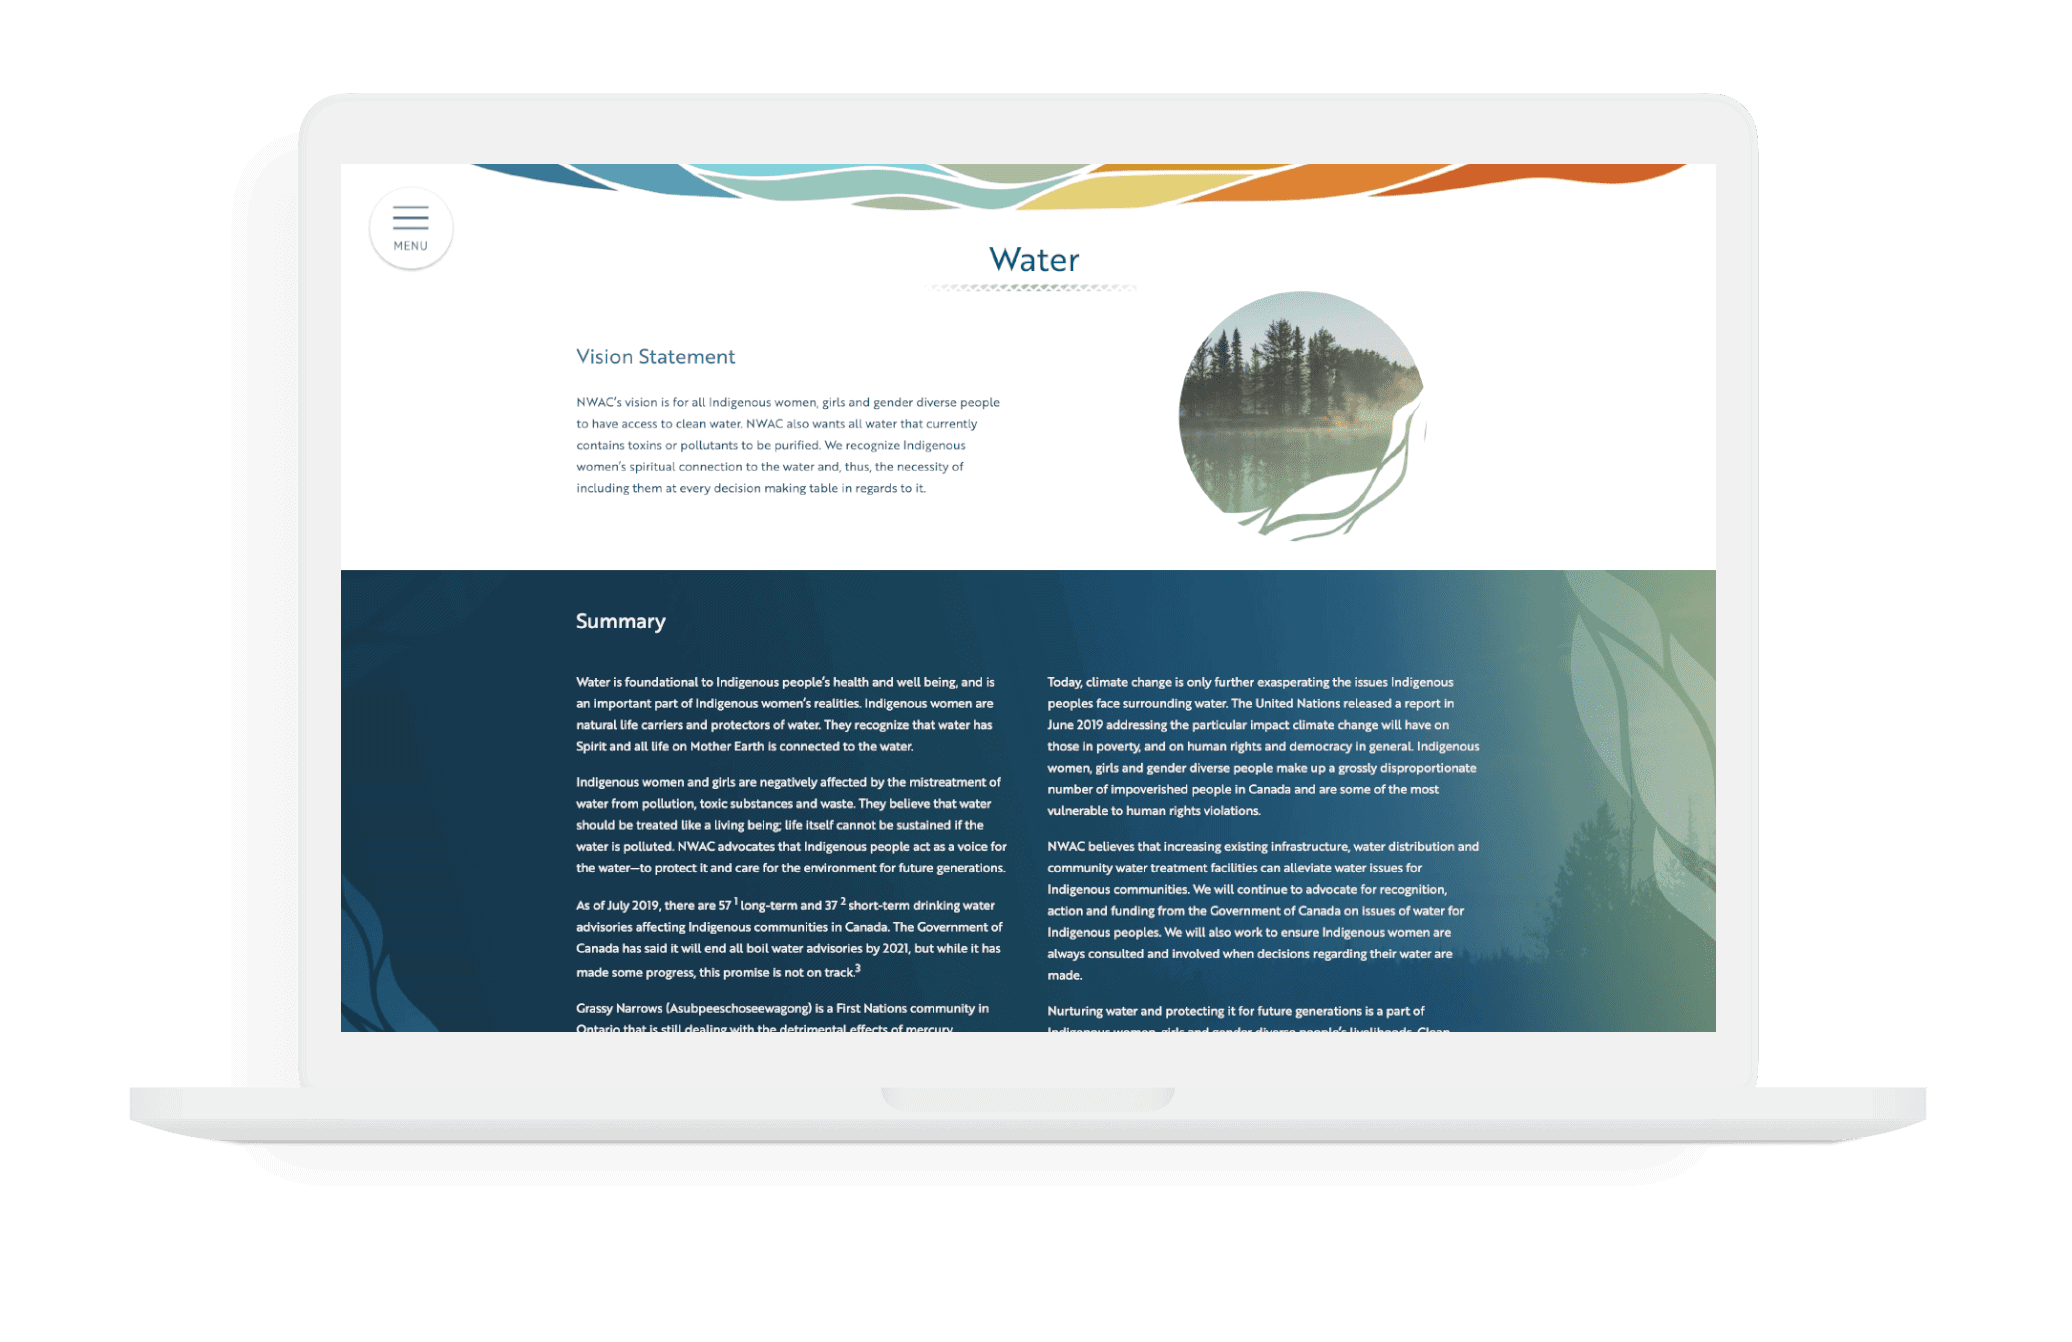 A Macbook mockup of the NWAC website's water section. The site features a vision statement and a summary.